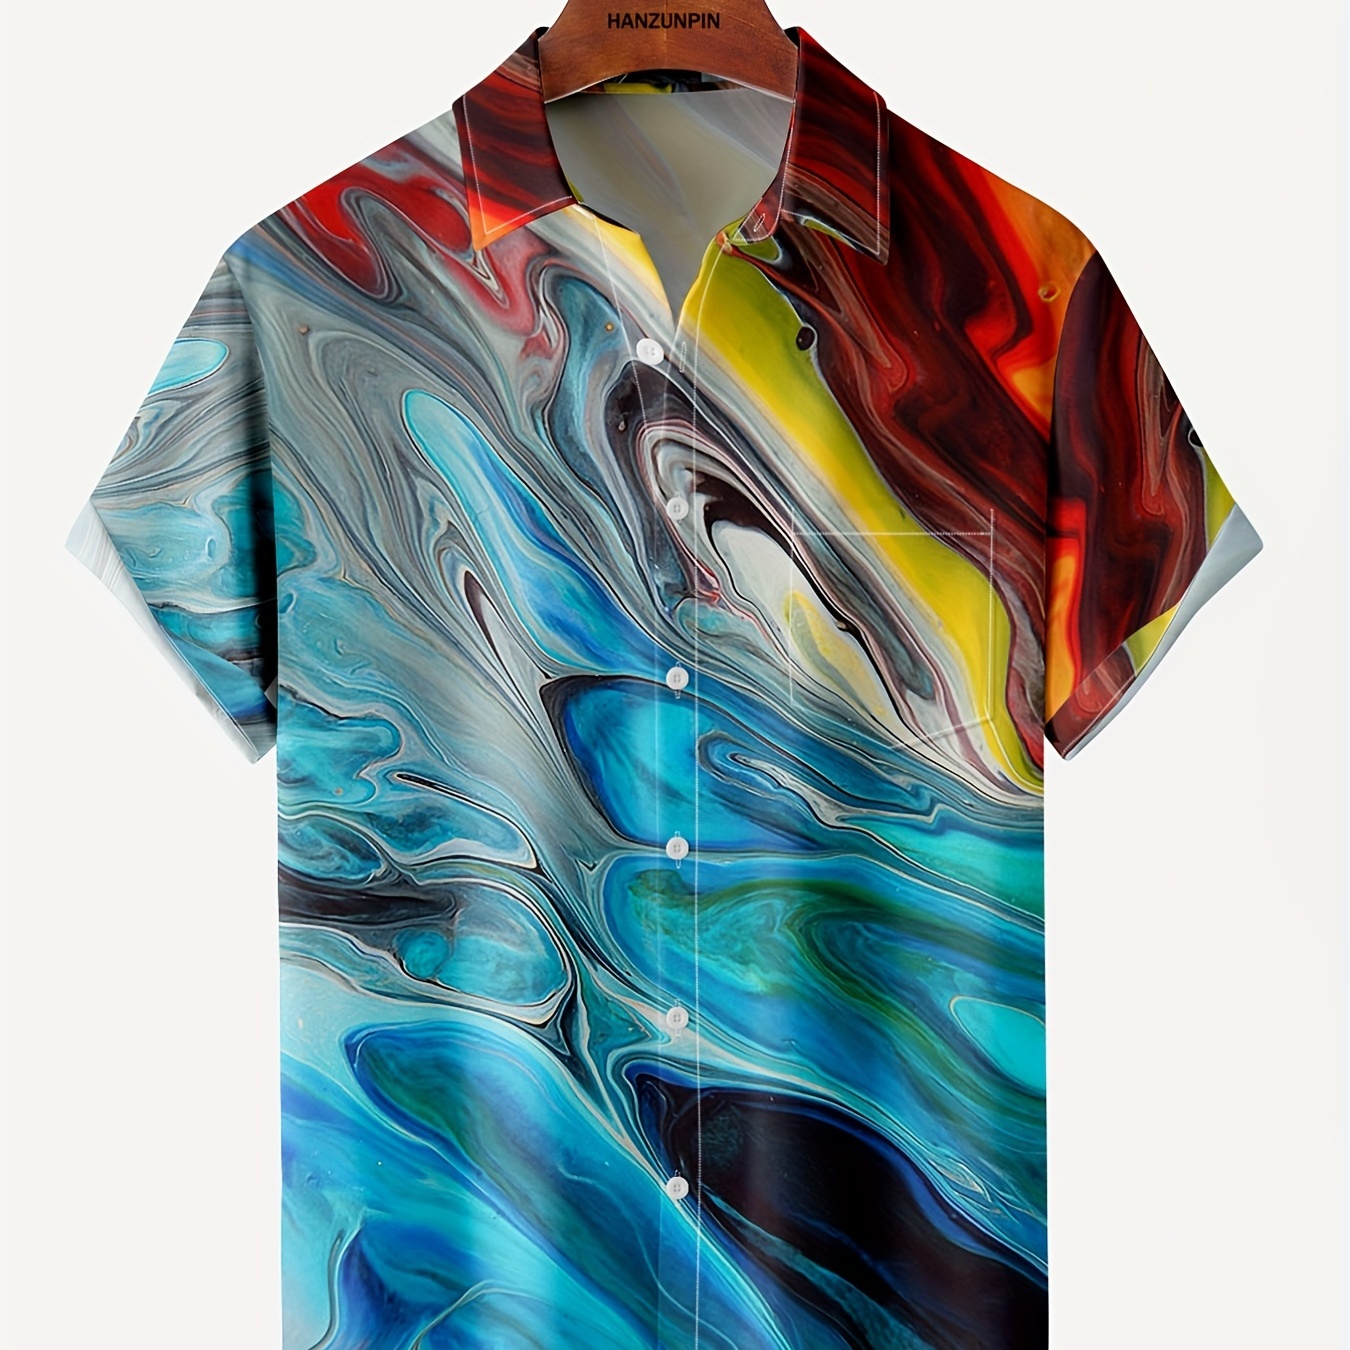 

Plus Size Men's Colorful Hawaiian Shirts For Beach, Comfy Full Printed Short Sleeve Aloha Shirts, Oversized Casual Loose Tops For Summer